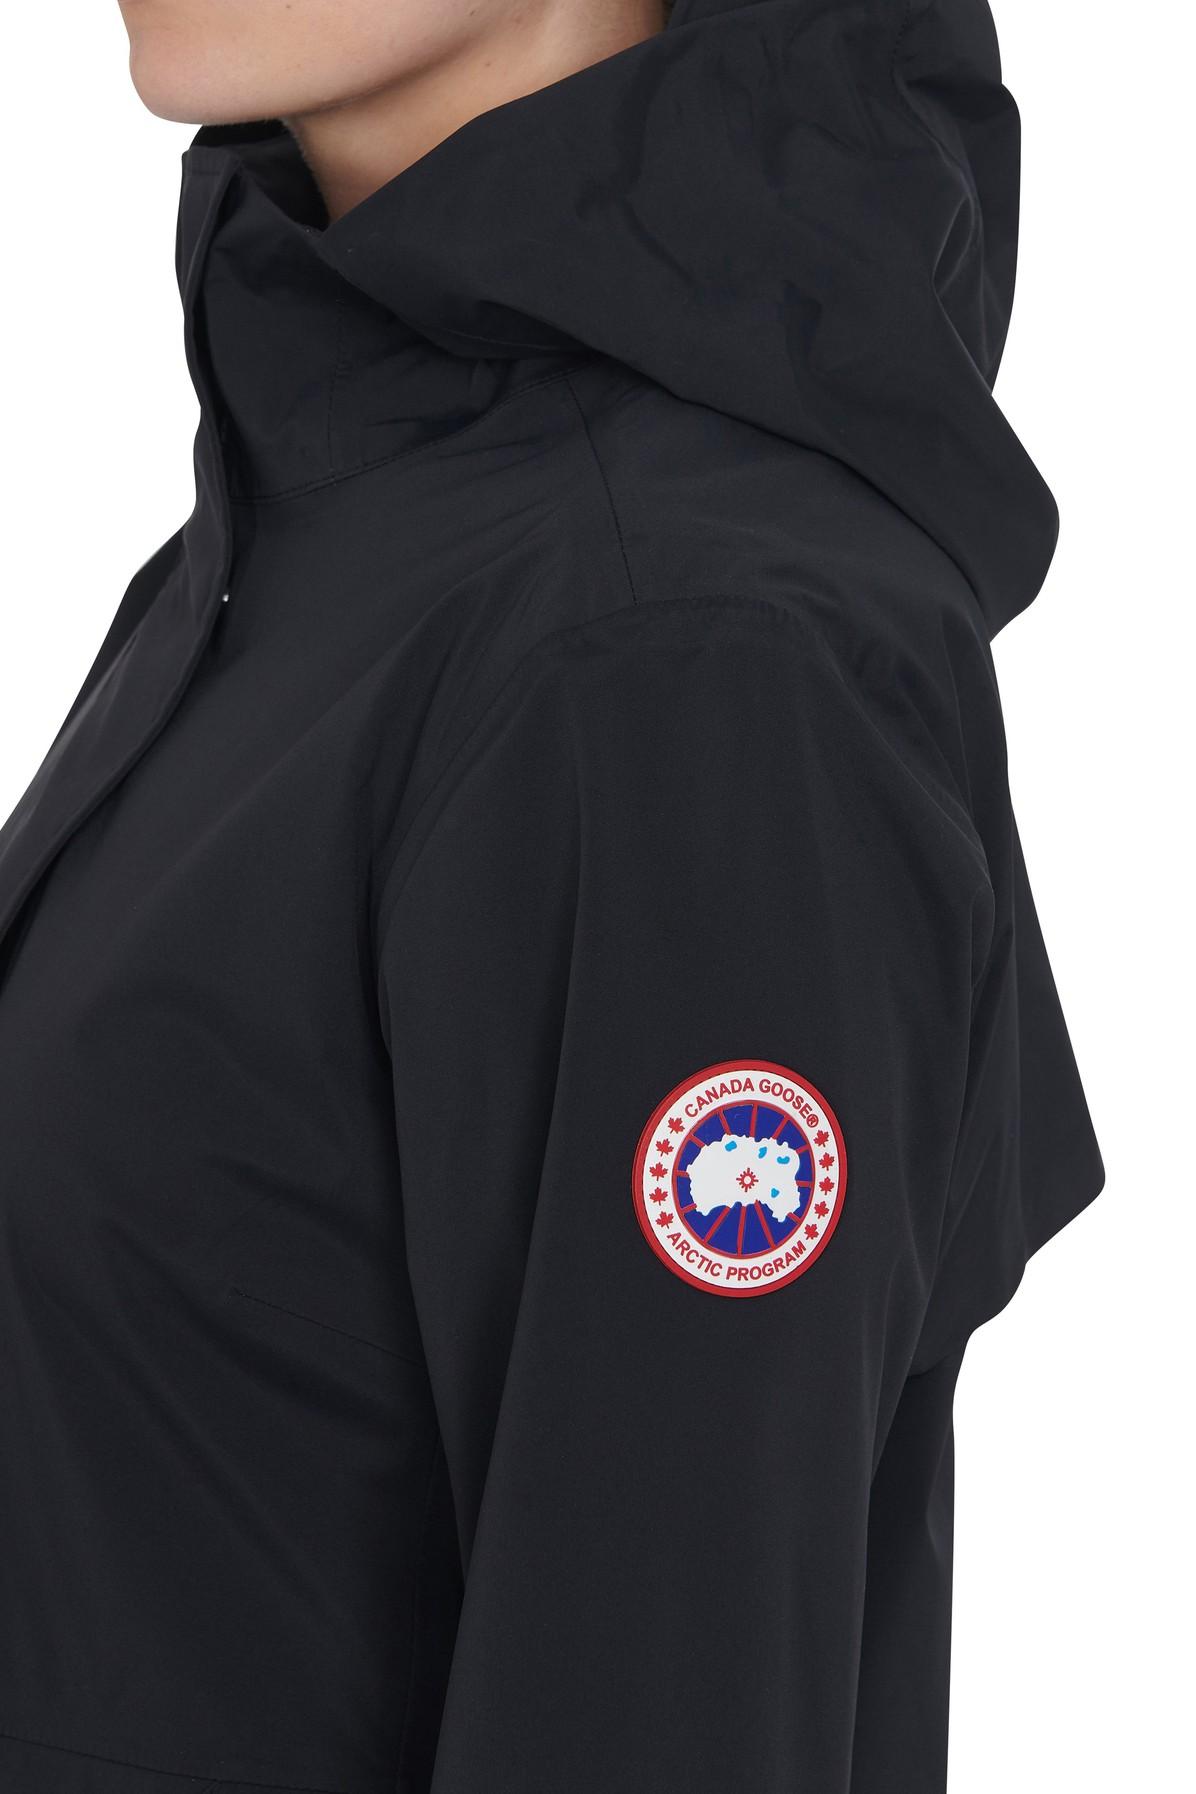 Canada Goose Synthetic ' Label' Salida Jacket, Plain Pattern in 